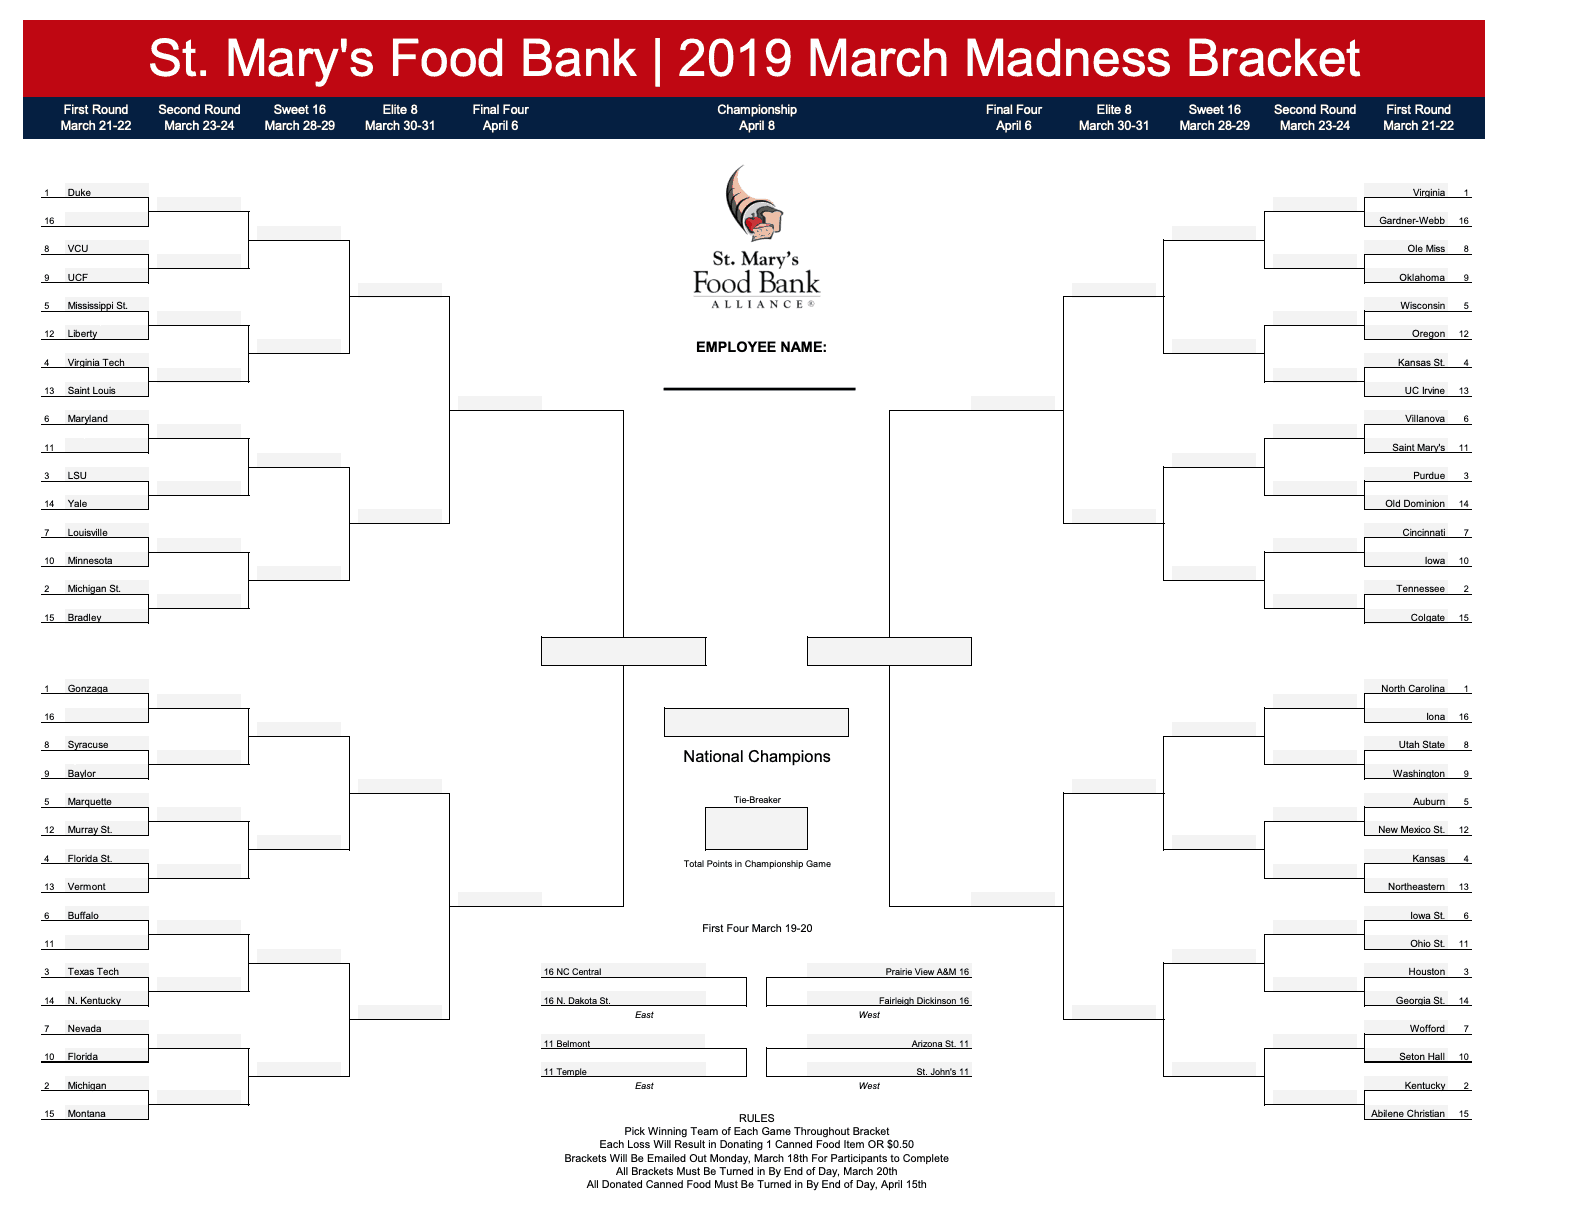 St. Mary's Food Bank 1st Annual March Madness Food Drive